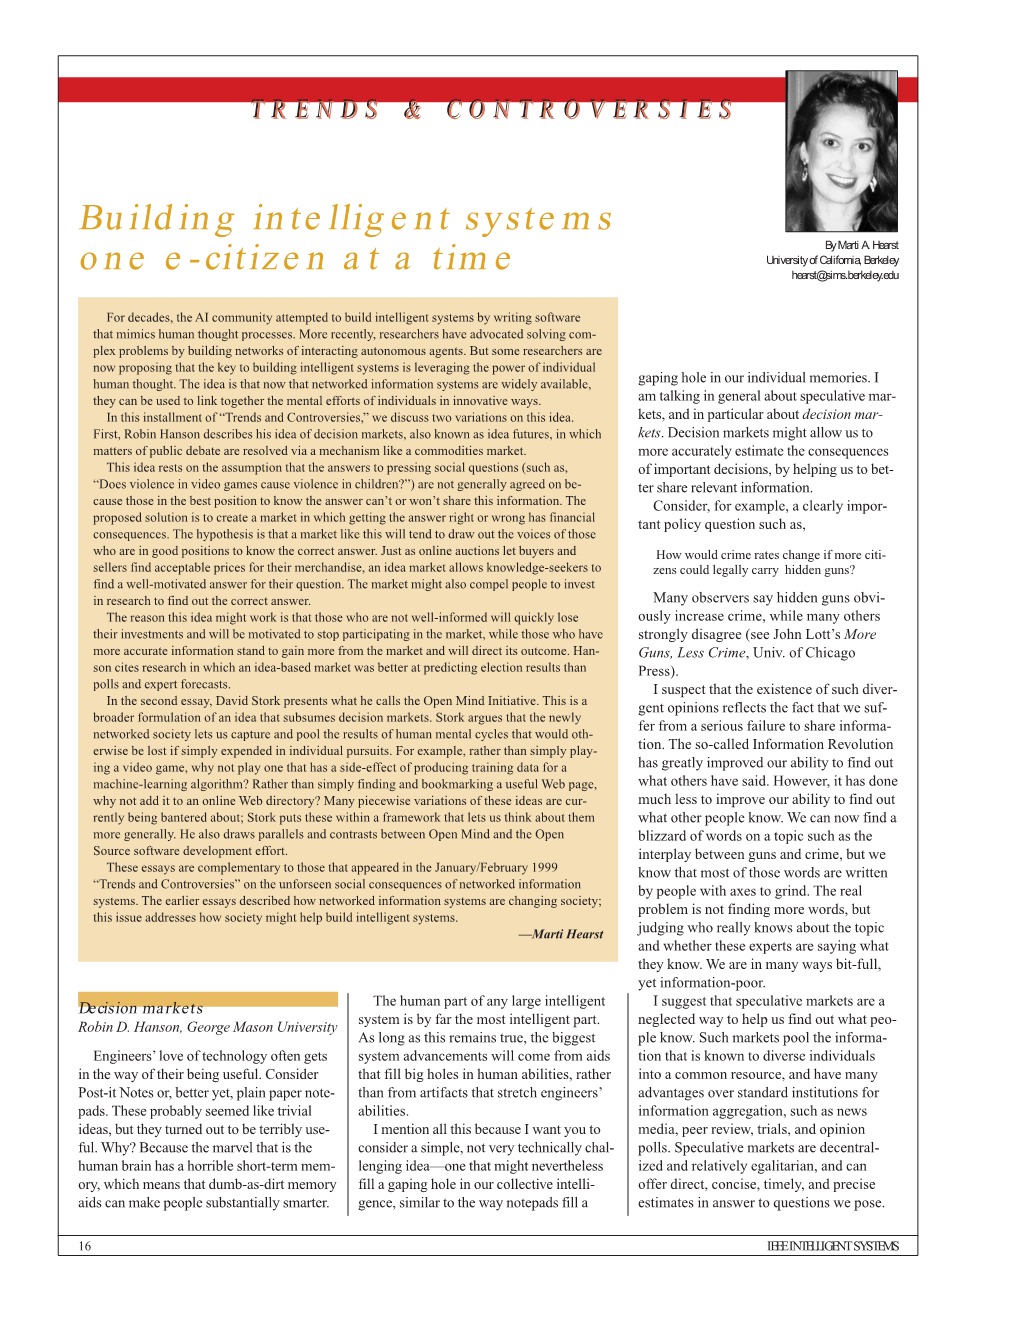 Building Intelligent Systems One E-Citizen at a Time